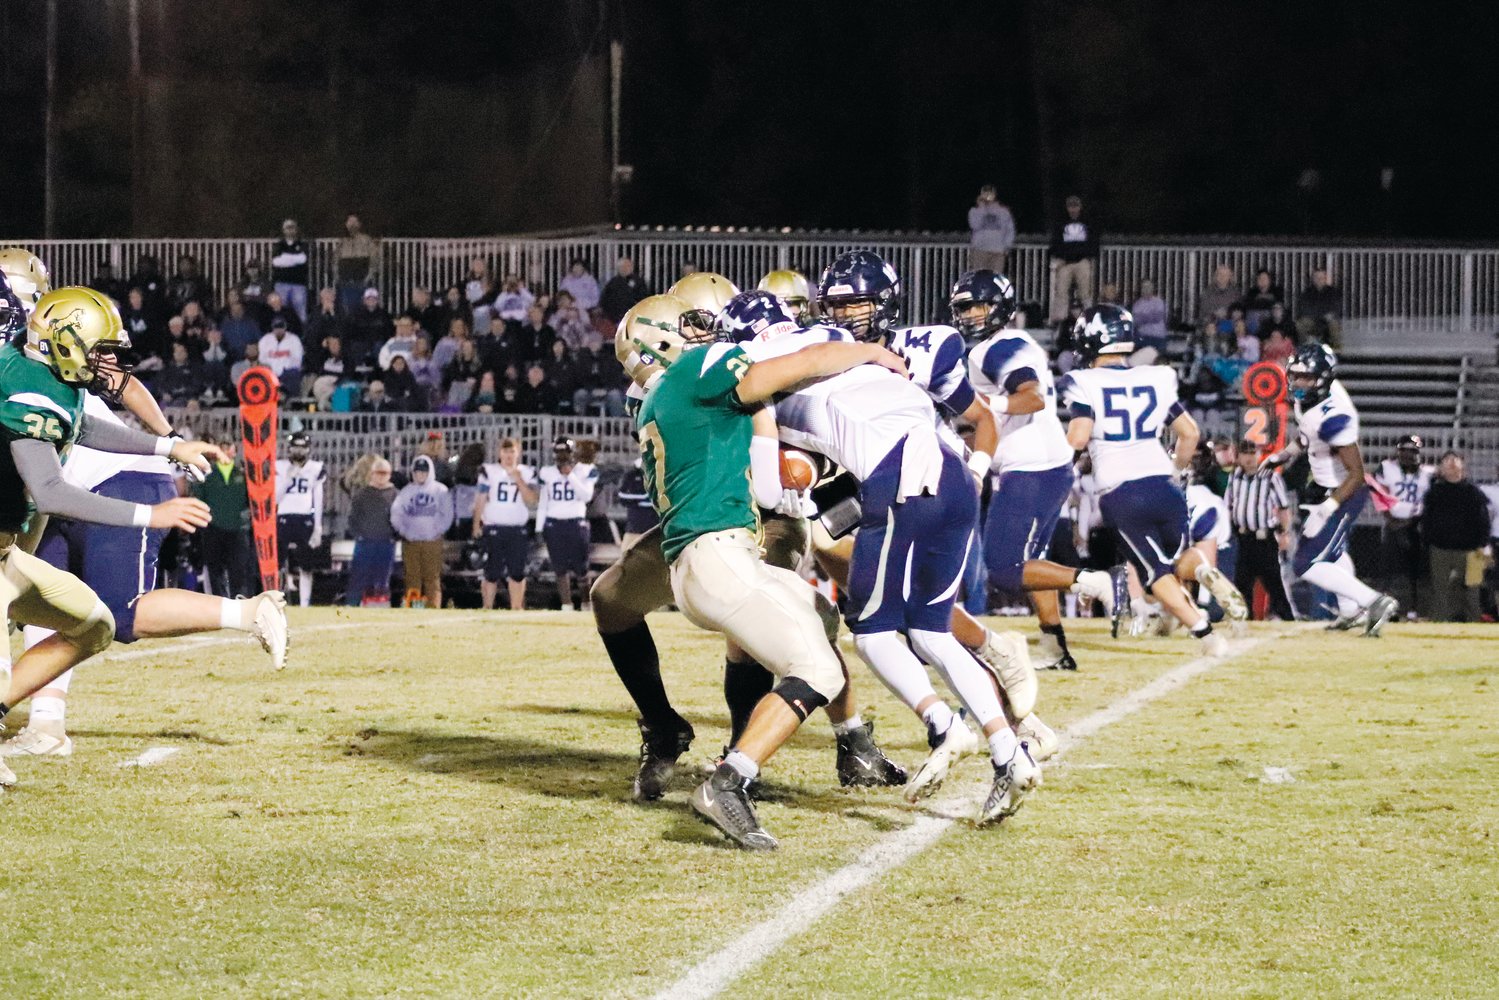 Northwood sophomore linebacker Ryan Brinker (27) brings down a Western Alamance ballcarrier during the Chargers' 21-6 loss to the Warriors last Friday. Brinker also blocked a punt in the first quarter.